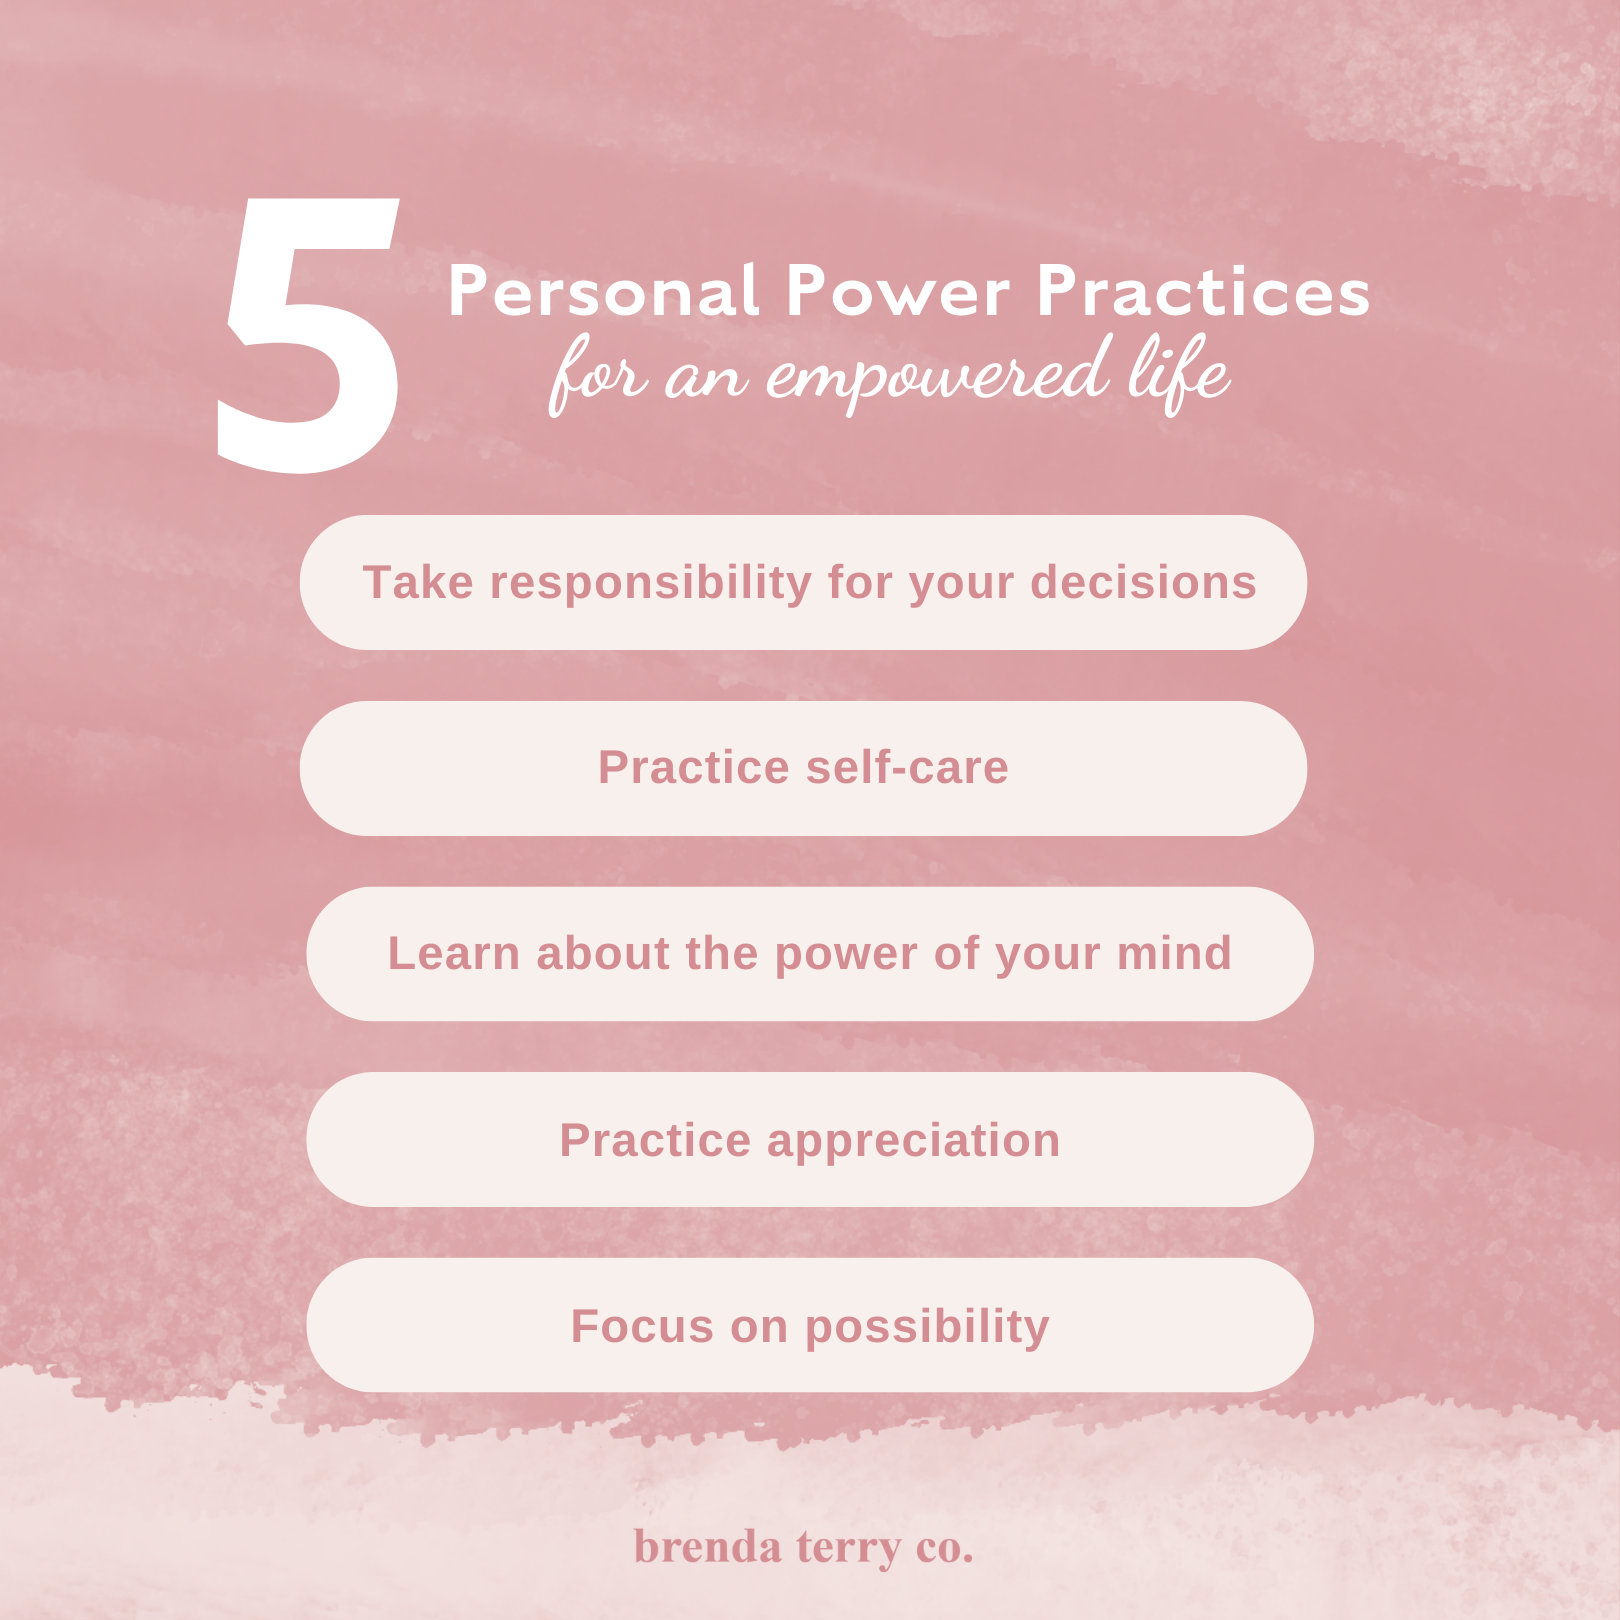 5 Personal Power Practices to Live and Empowered Life